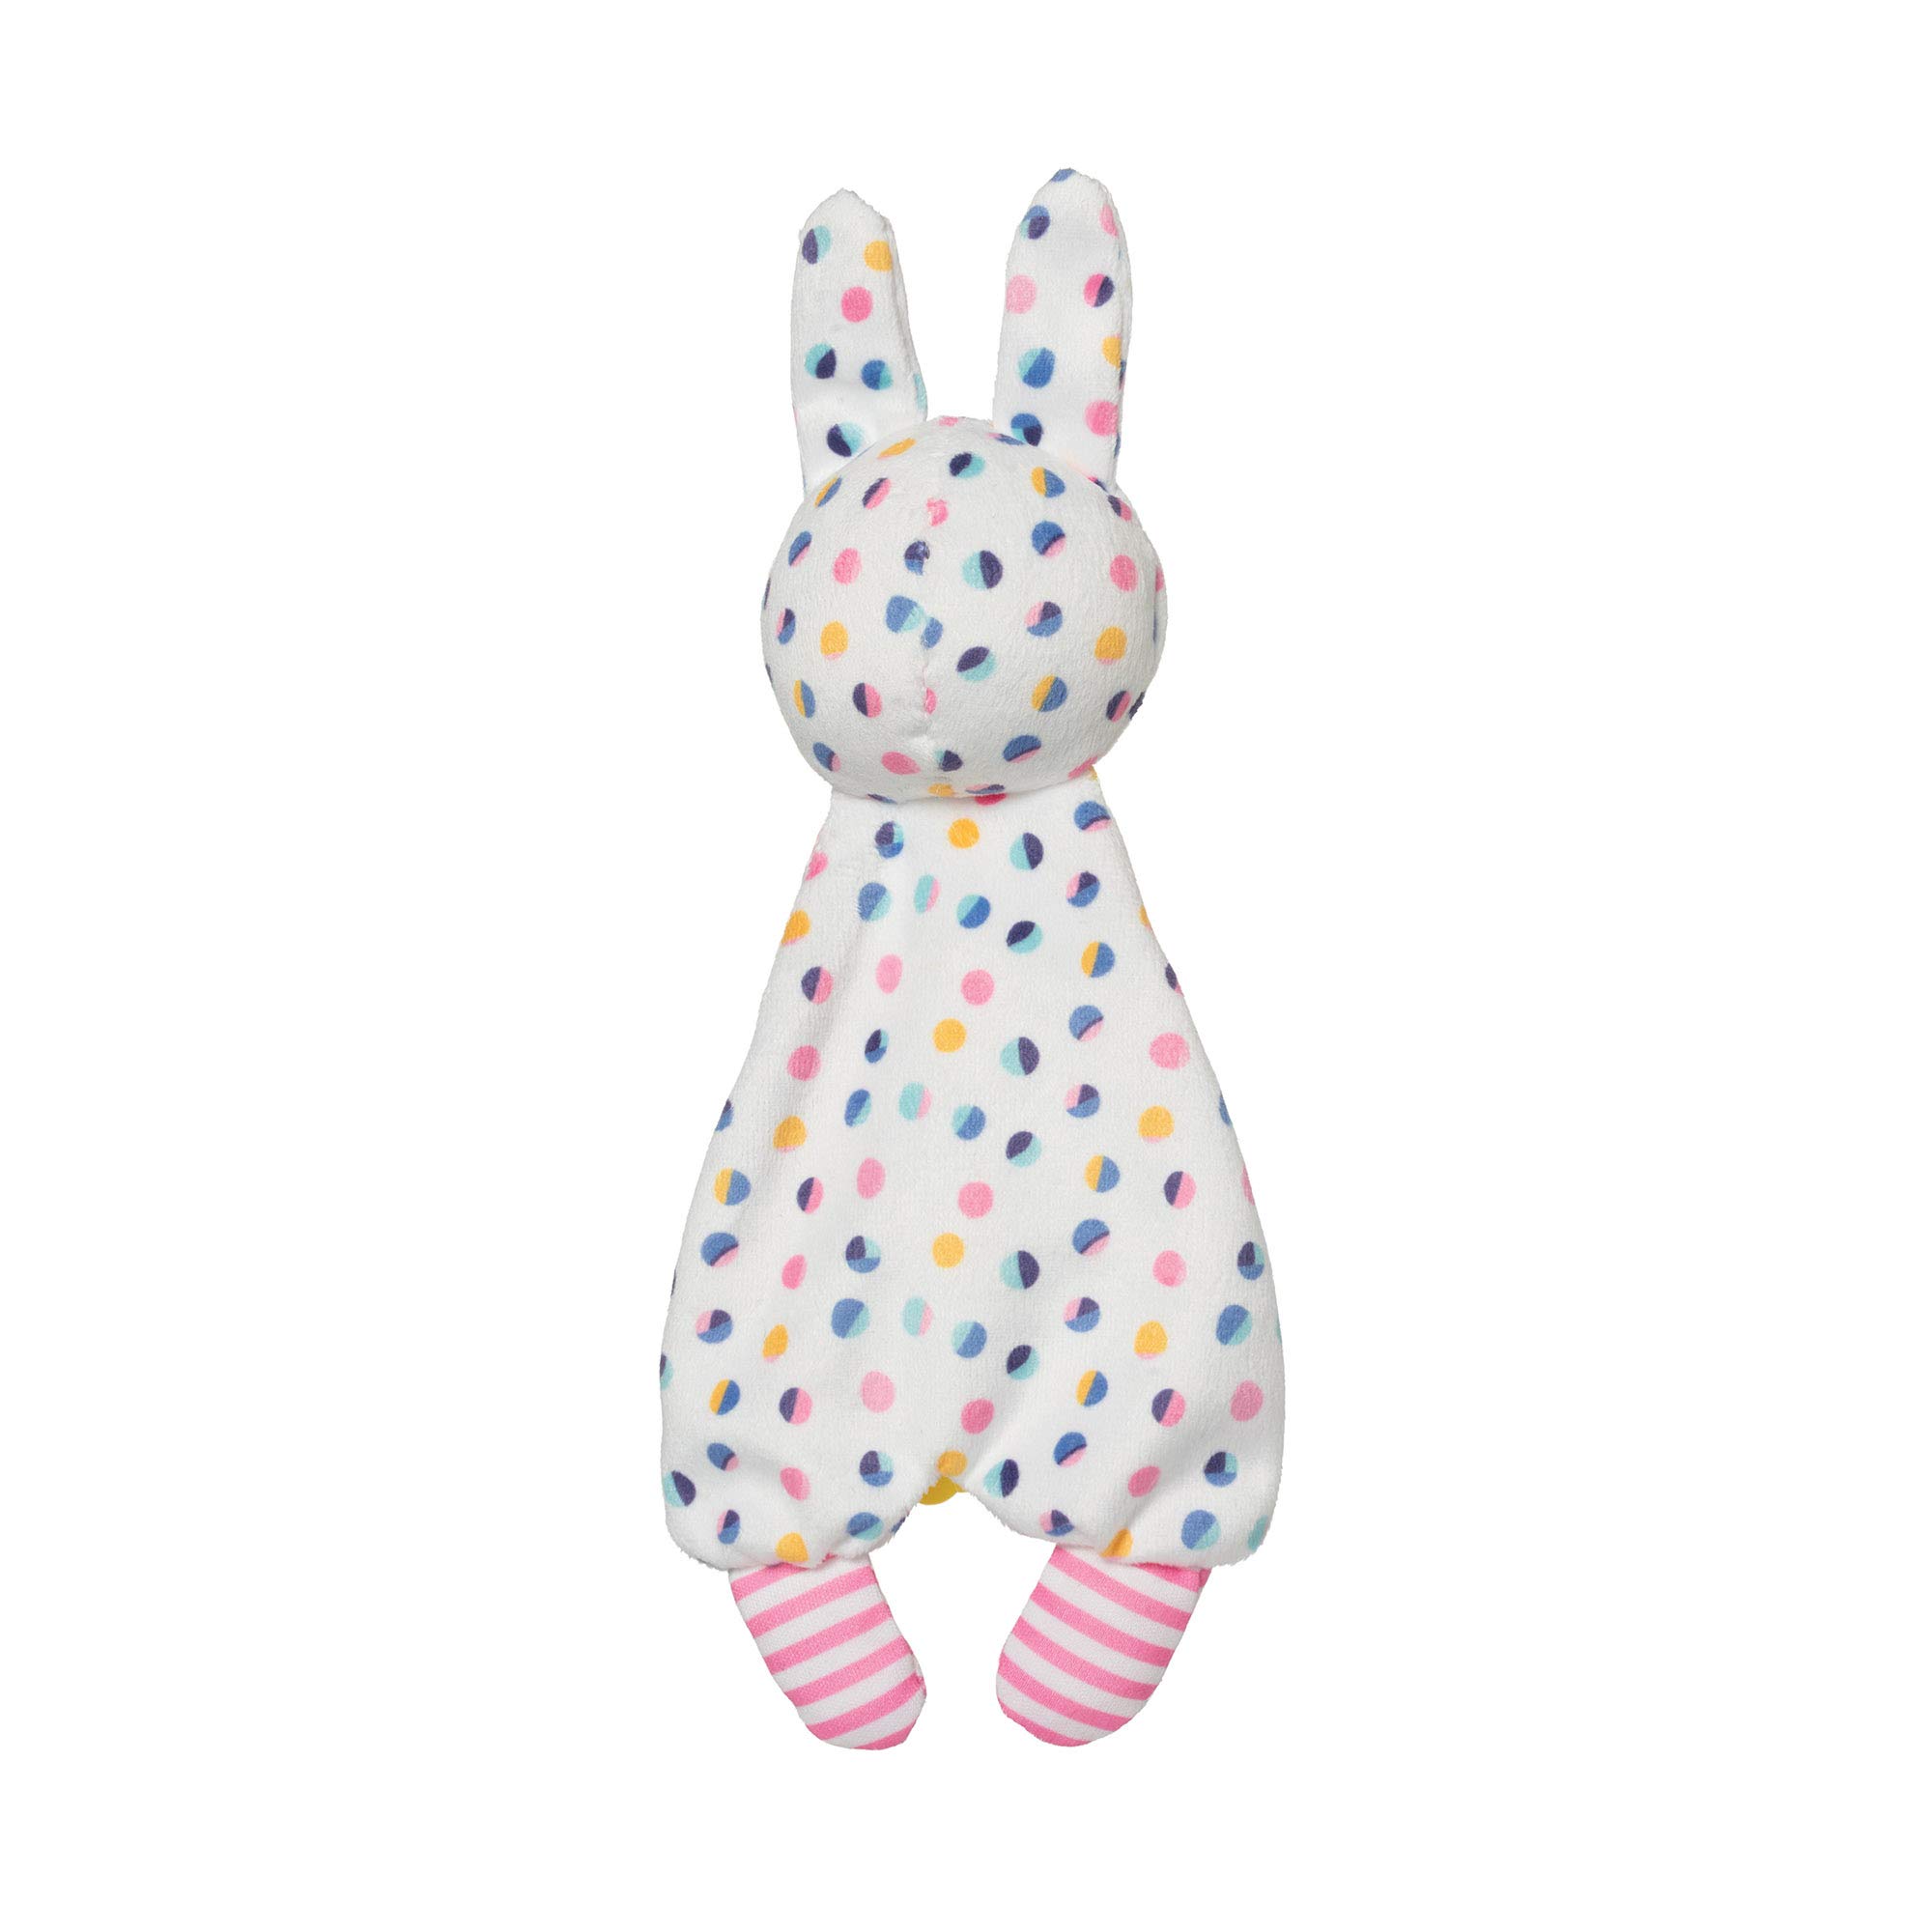 Manhattan Toy Cherry Blossom Days Baby Bunny Soothing Mini Blankie with Removable Silicone Teether Multi